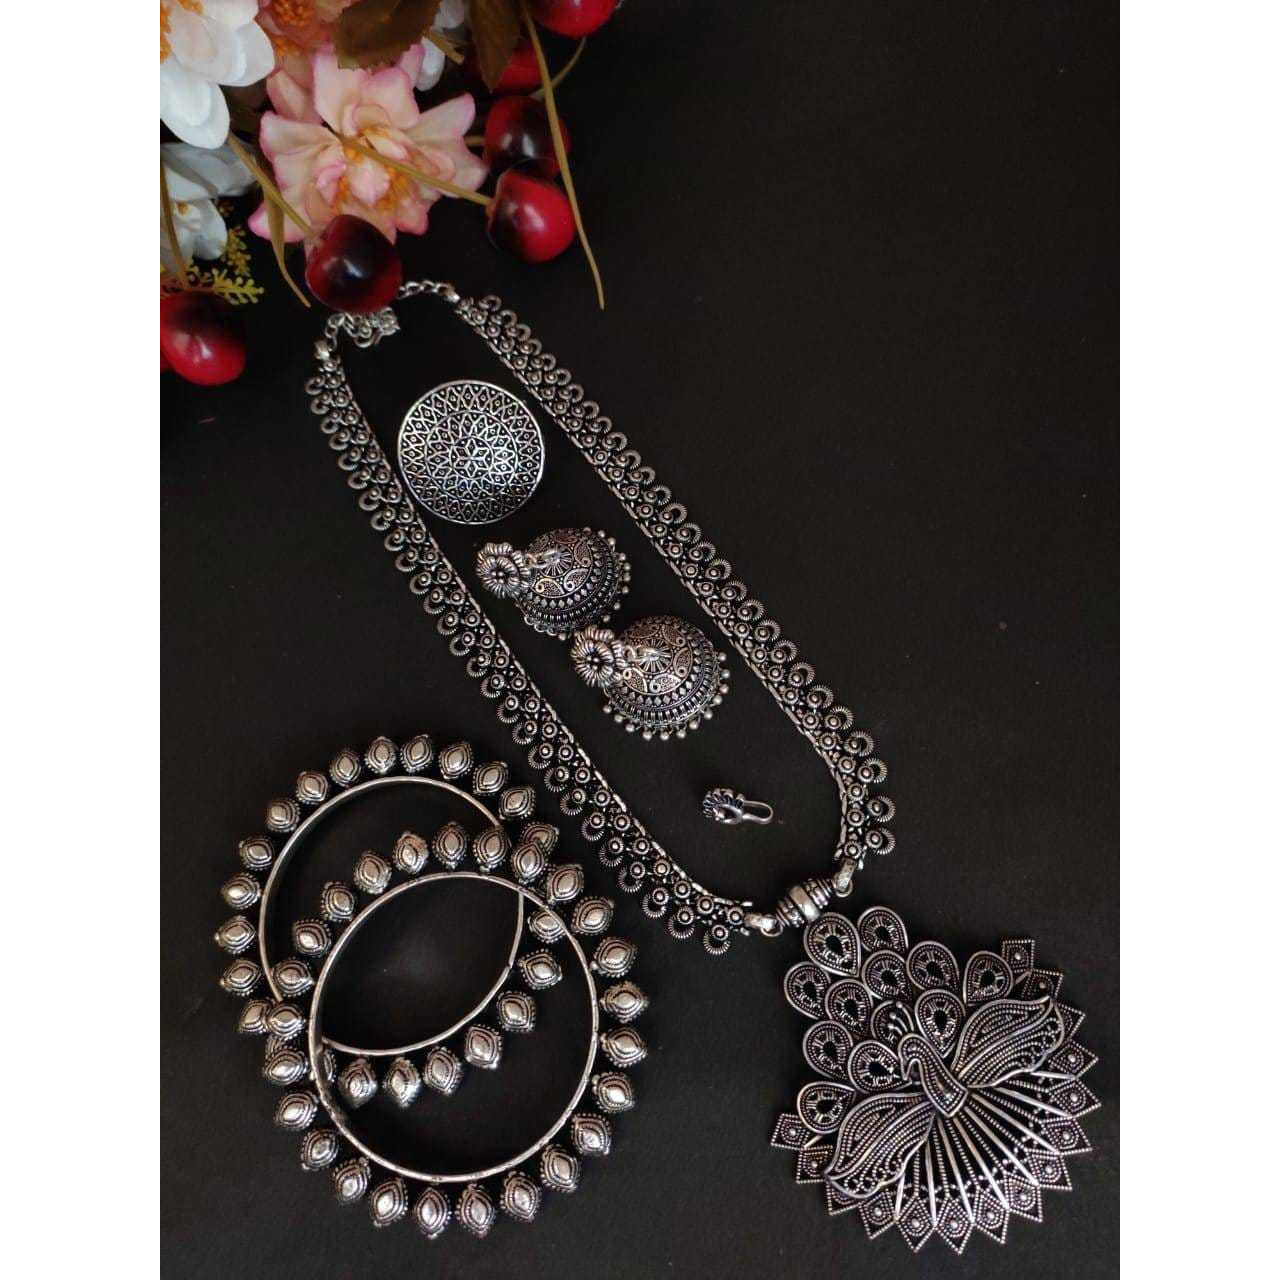 Nothing can beat the basic stud earrings when it comes to smartness quotient. Our Silver Oxidized Studs Earrings, Minimal and to the point, impart an effortless take to accessorizing. These earrings are just what you need to complete a casual denim look or breezy dresses on hot summer days.